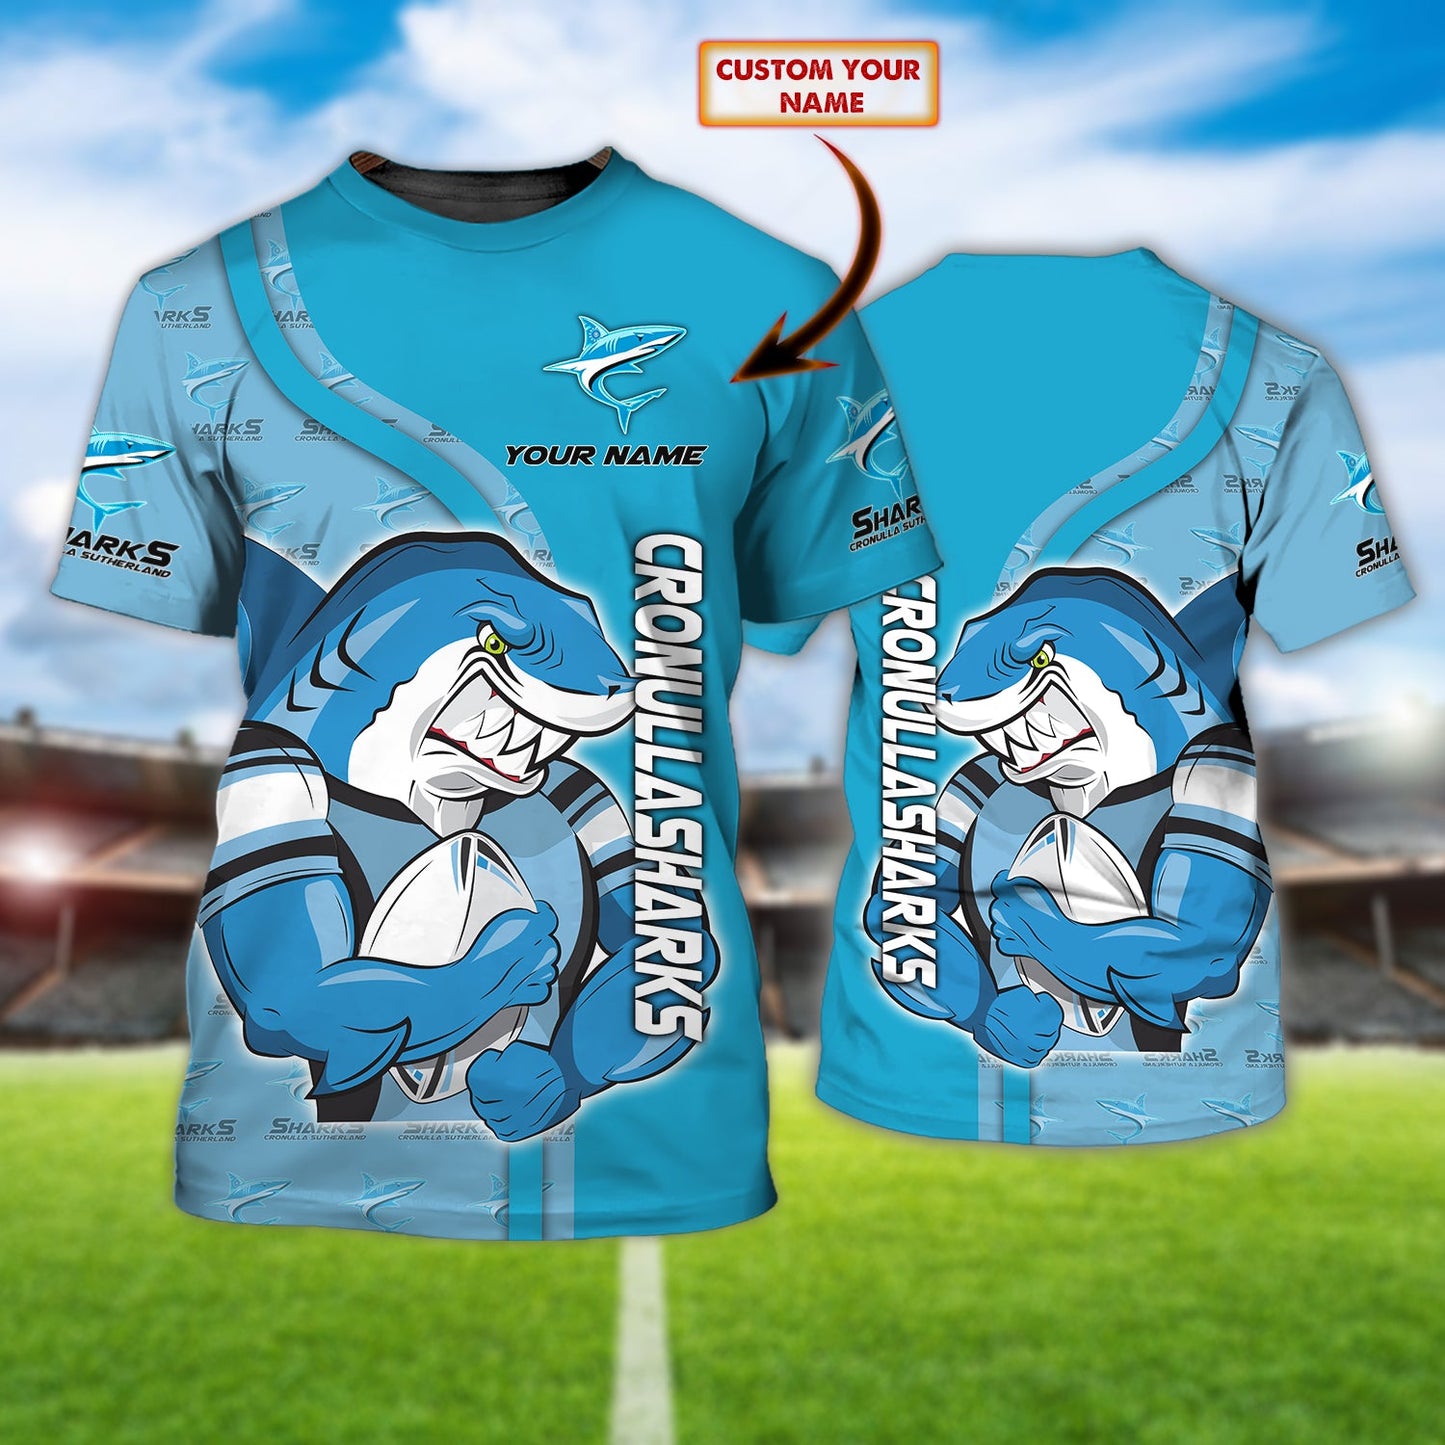 2023 Supporters Men's Cronulla-Sharks Rugby T-shirt.